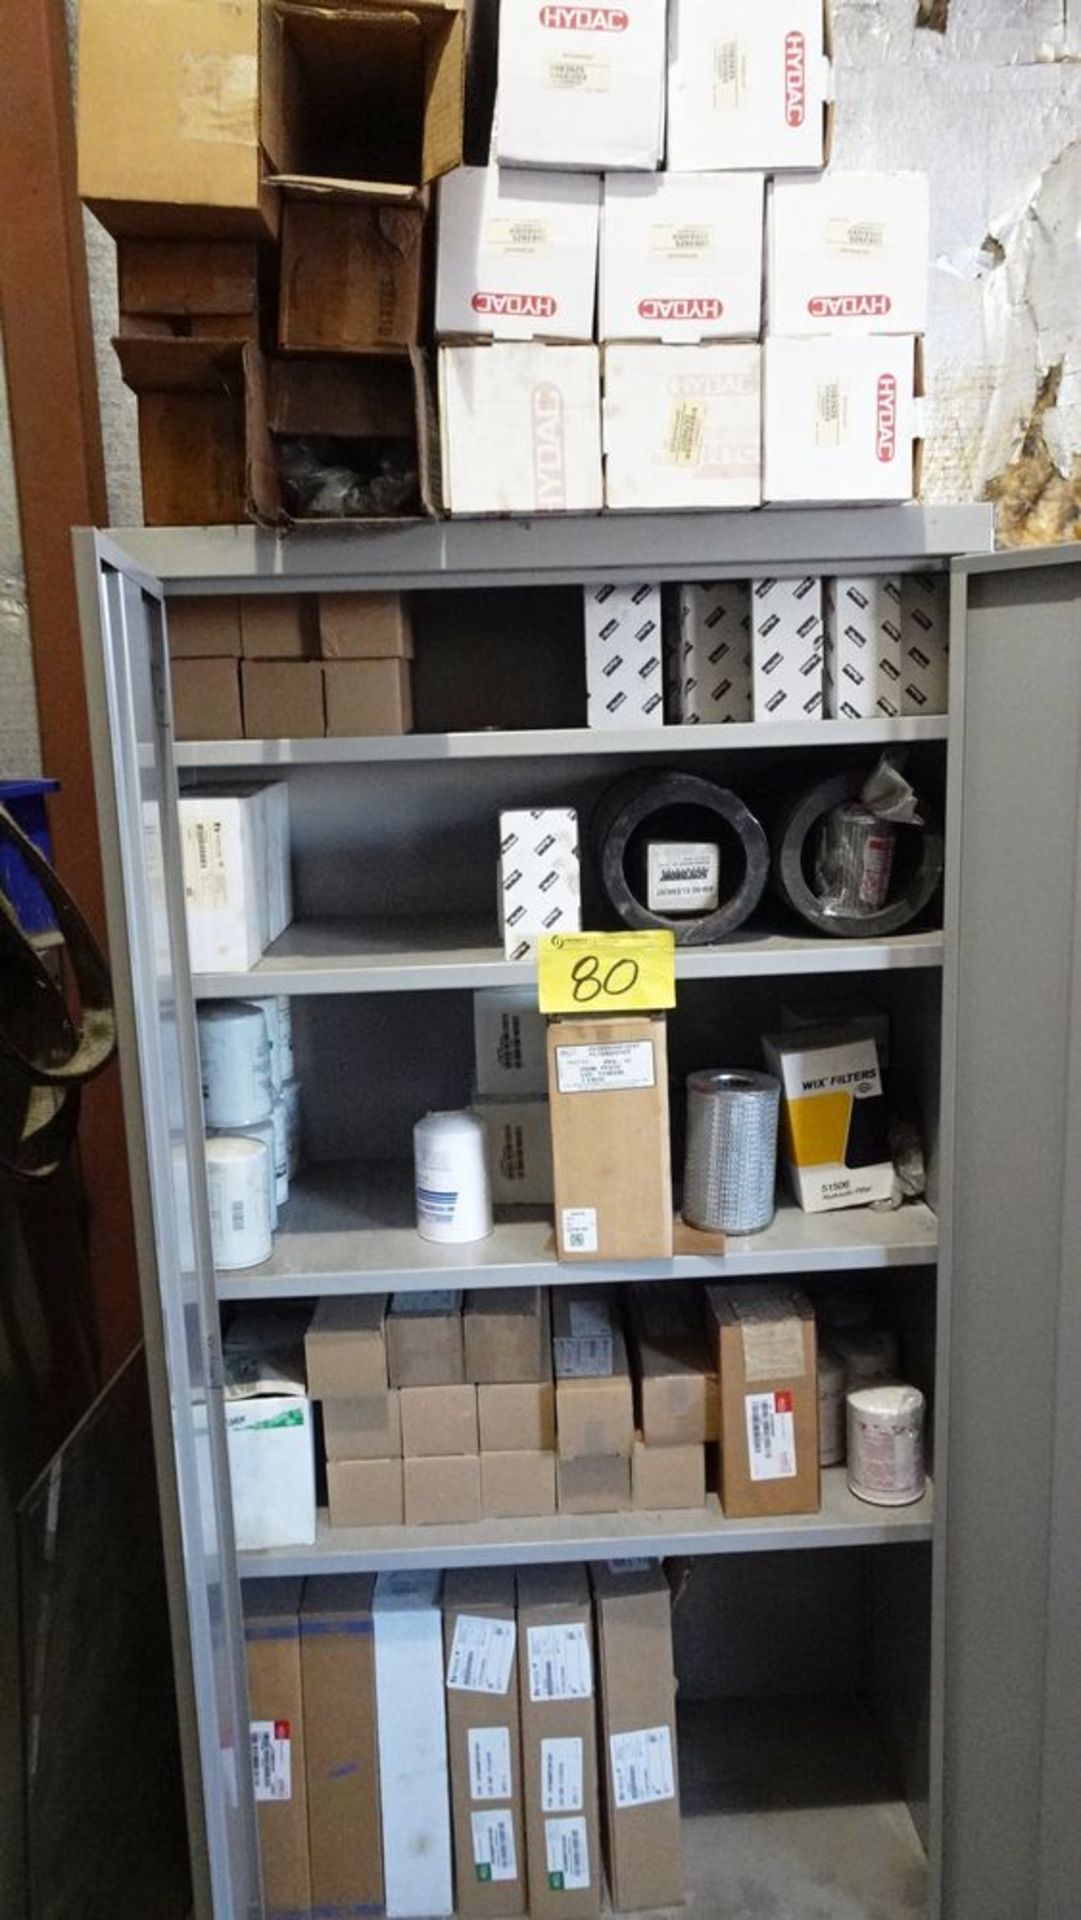 ASSORTED FILTERS, GREASE, NUTS & BOLTS, TWO DOOR CABINET, SECTION PALLET RACKING, FILING CABINET, - Image 6 of 8